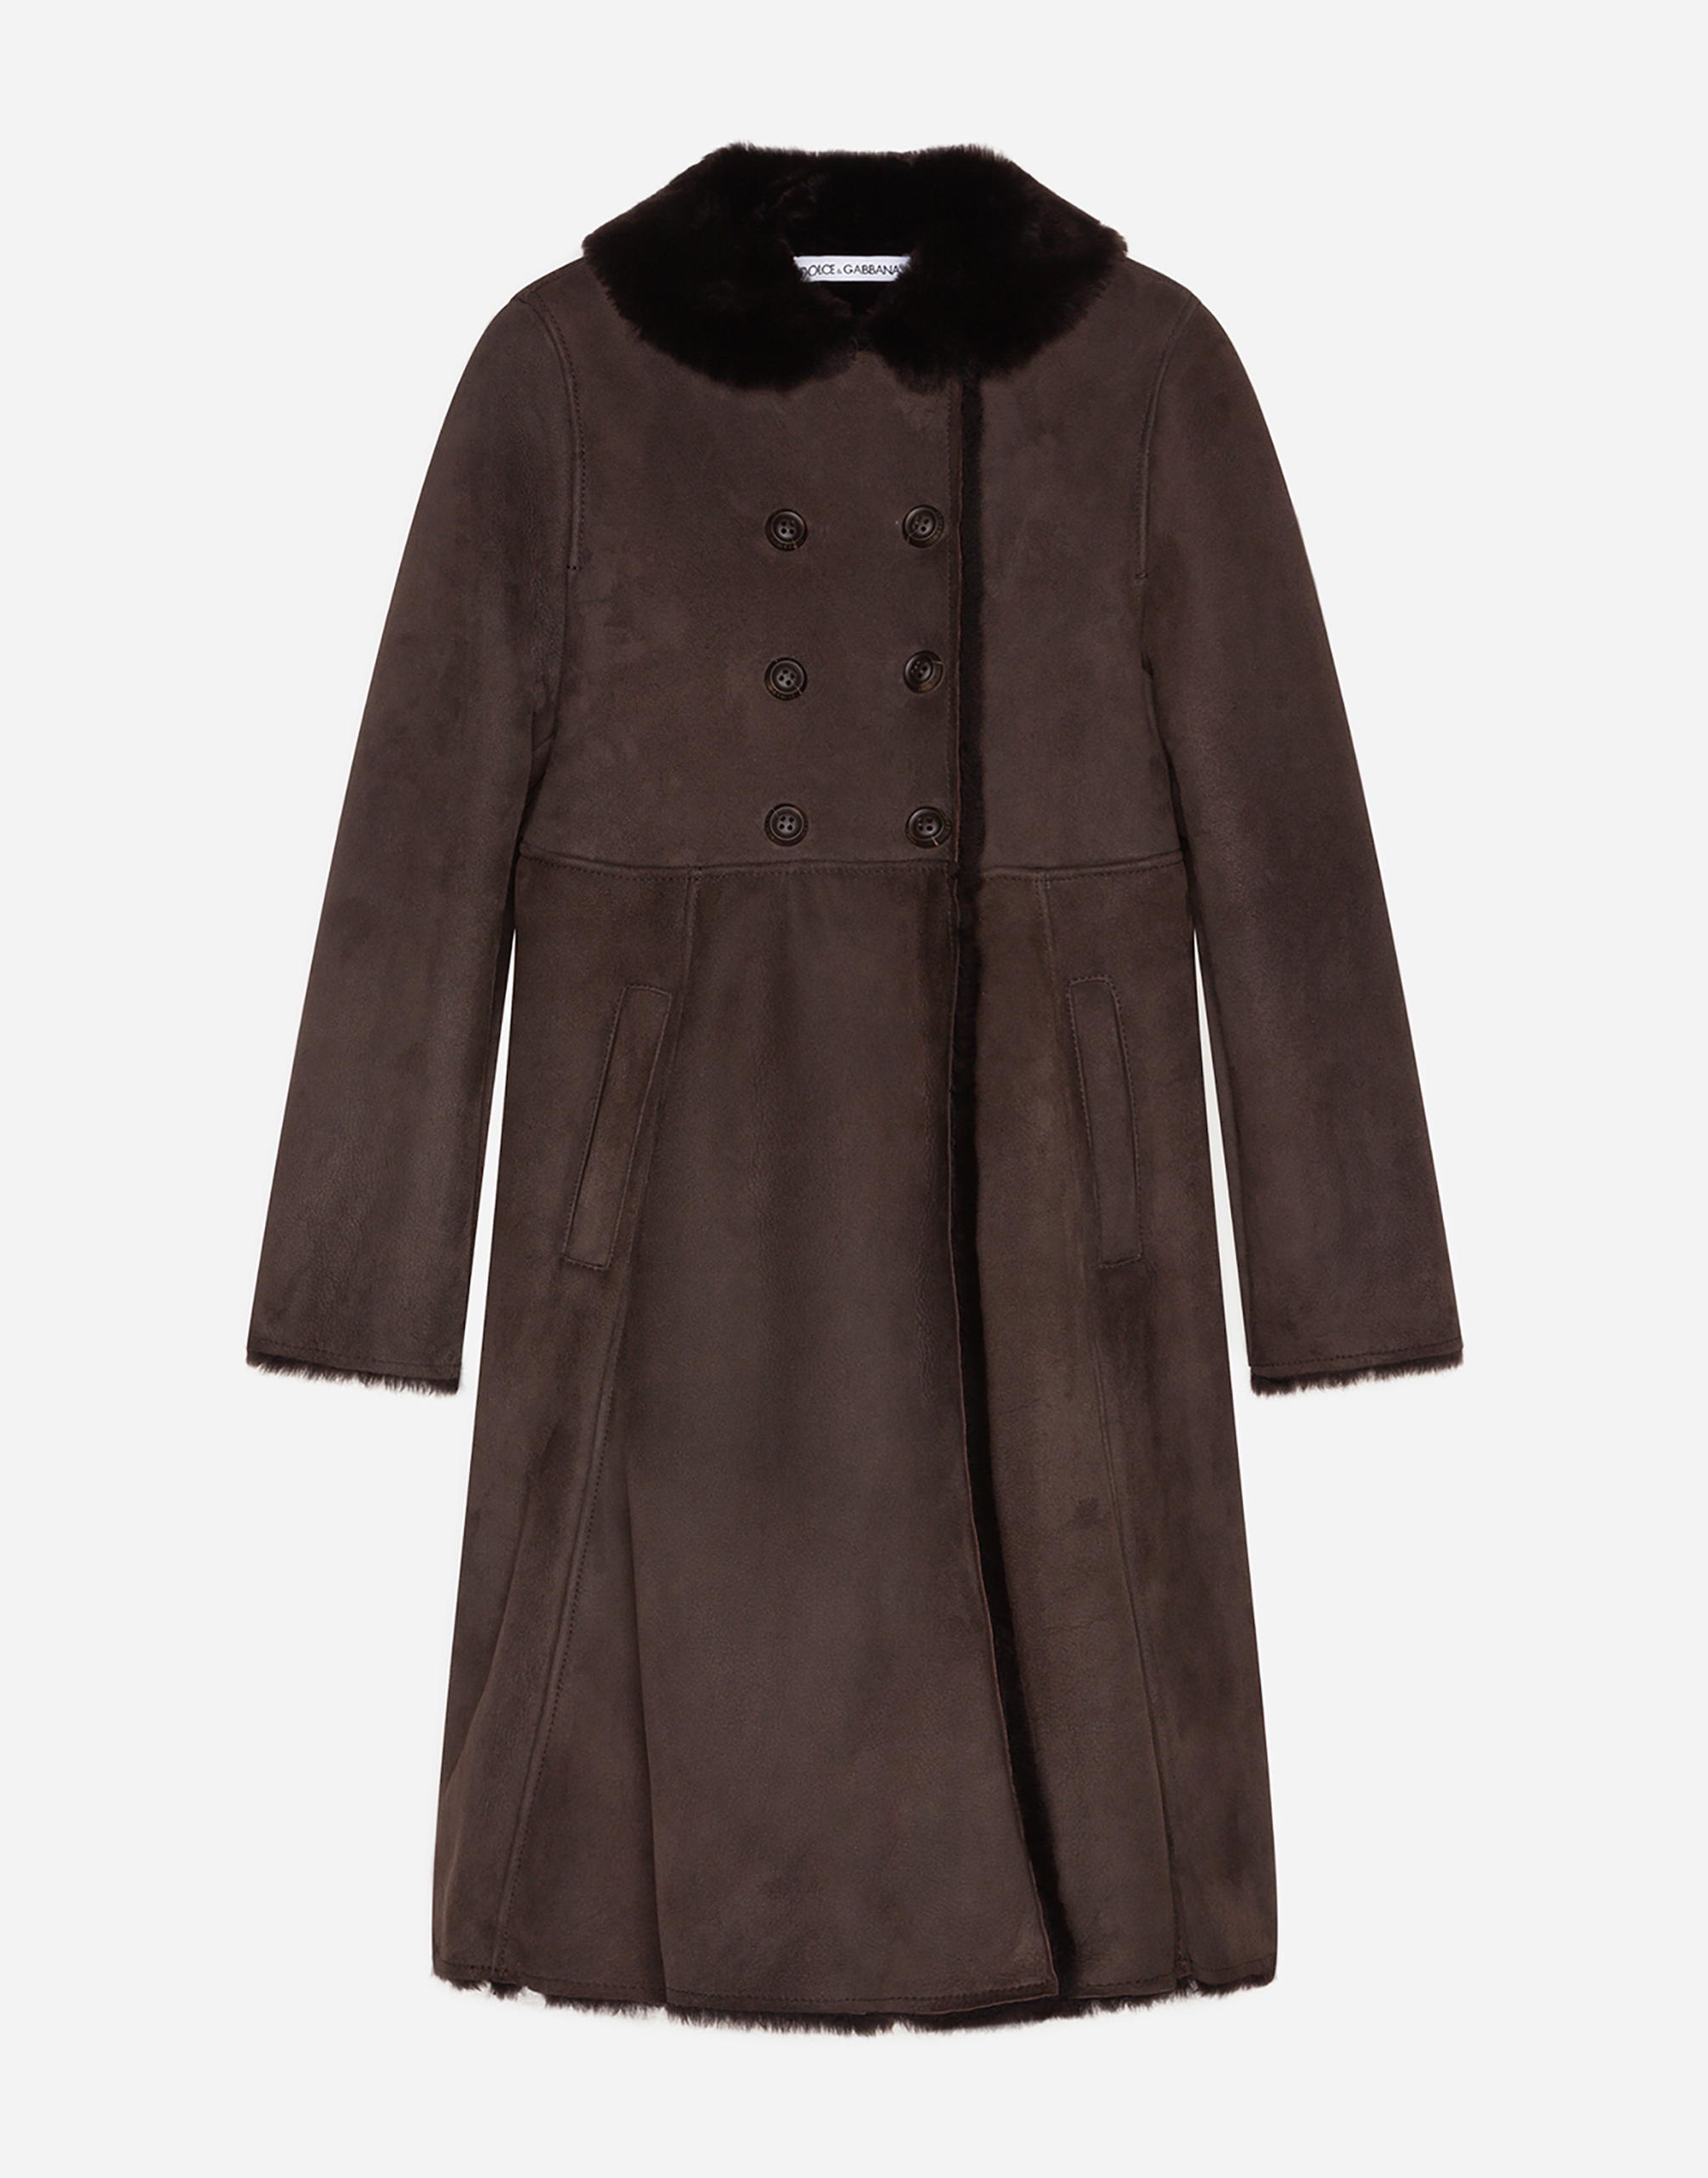 DOLCE & GABBANA Double-breasted shearling coat with decorative buttons